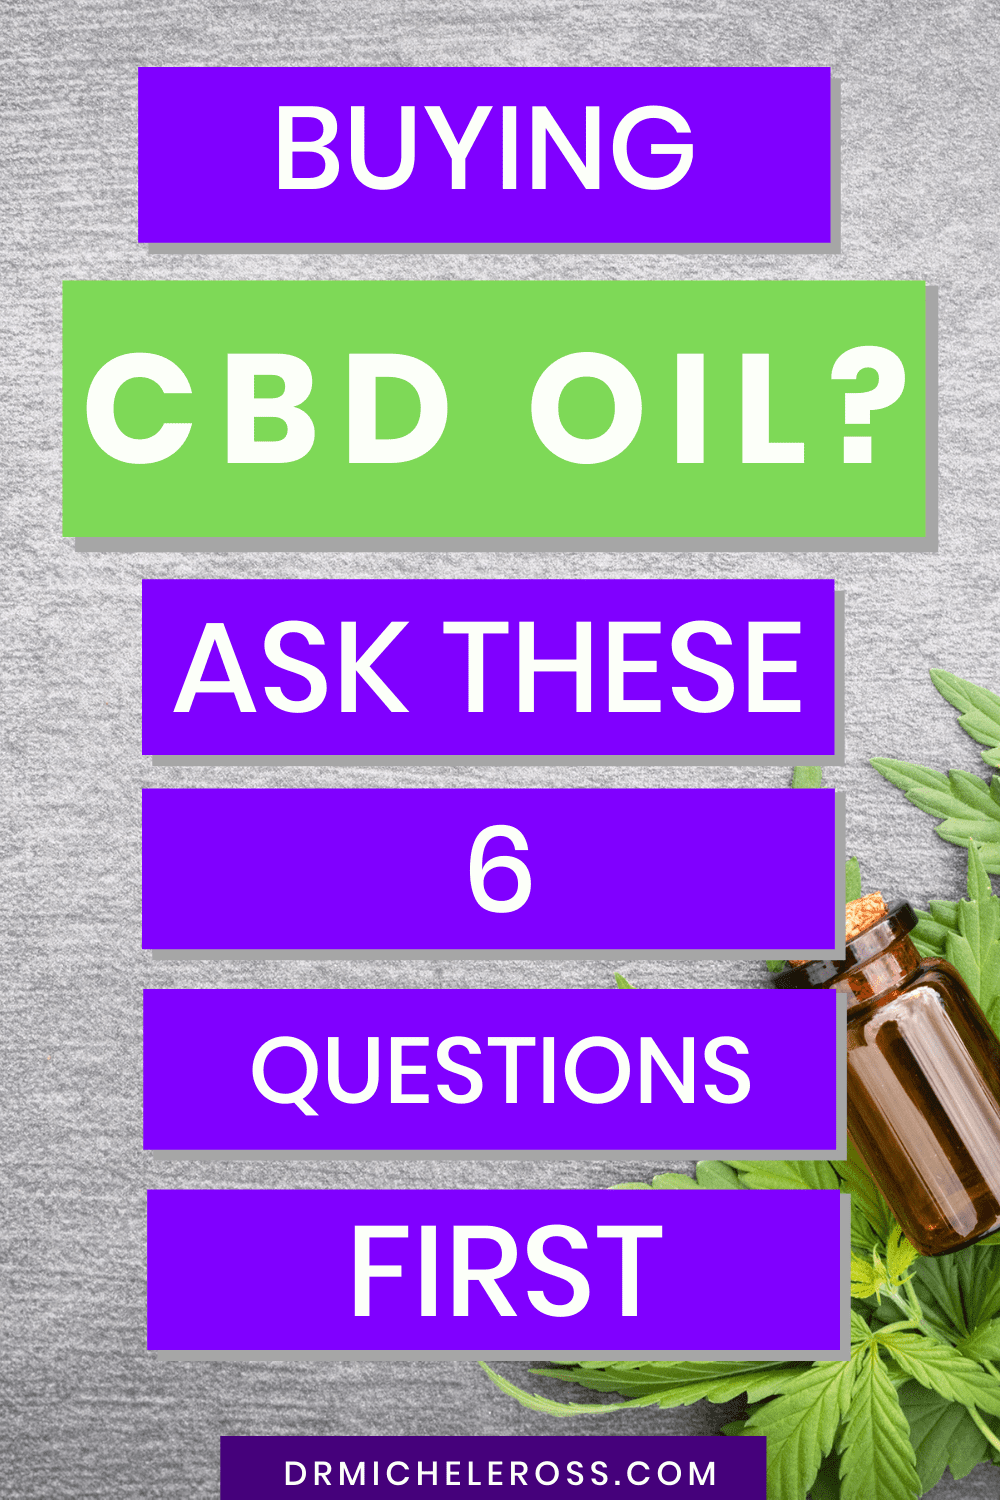 6 questions consumers should ask before buying cbd oil